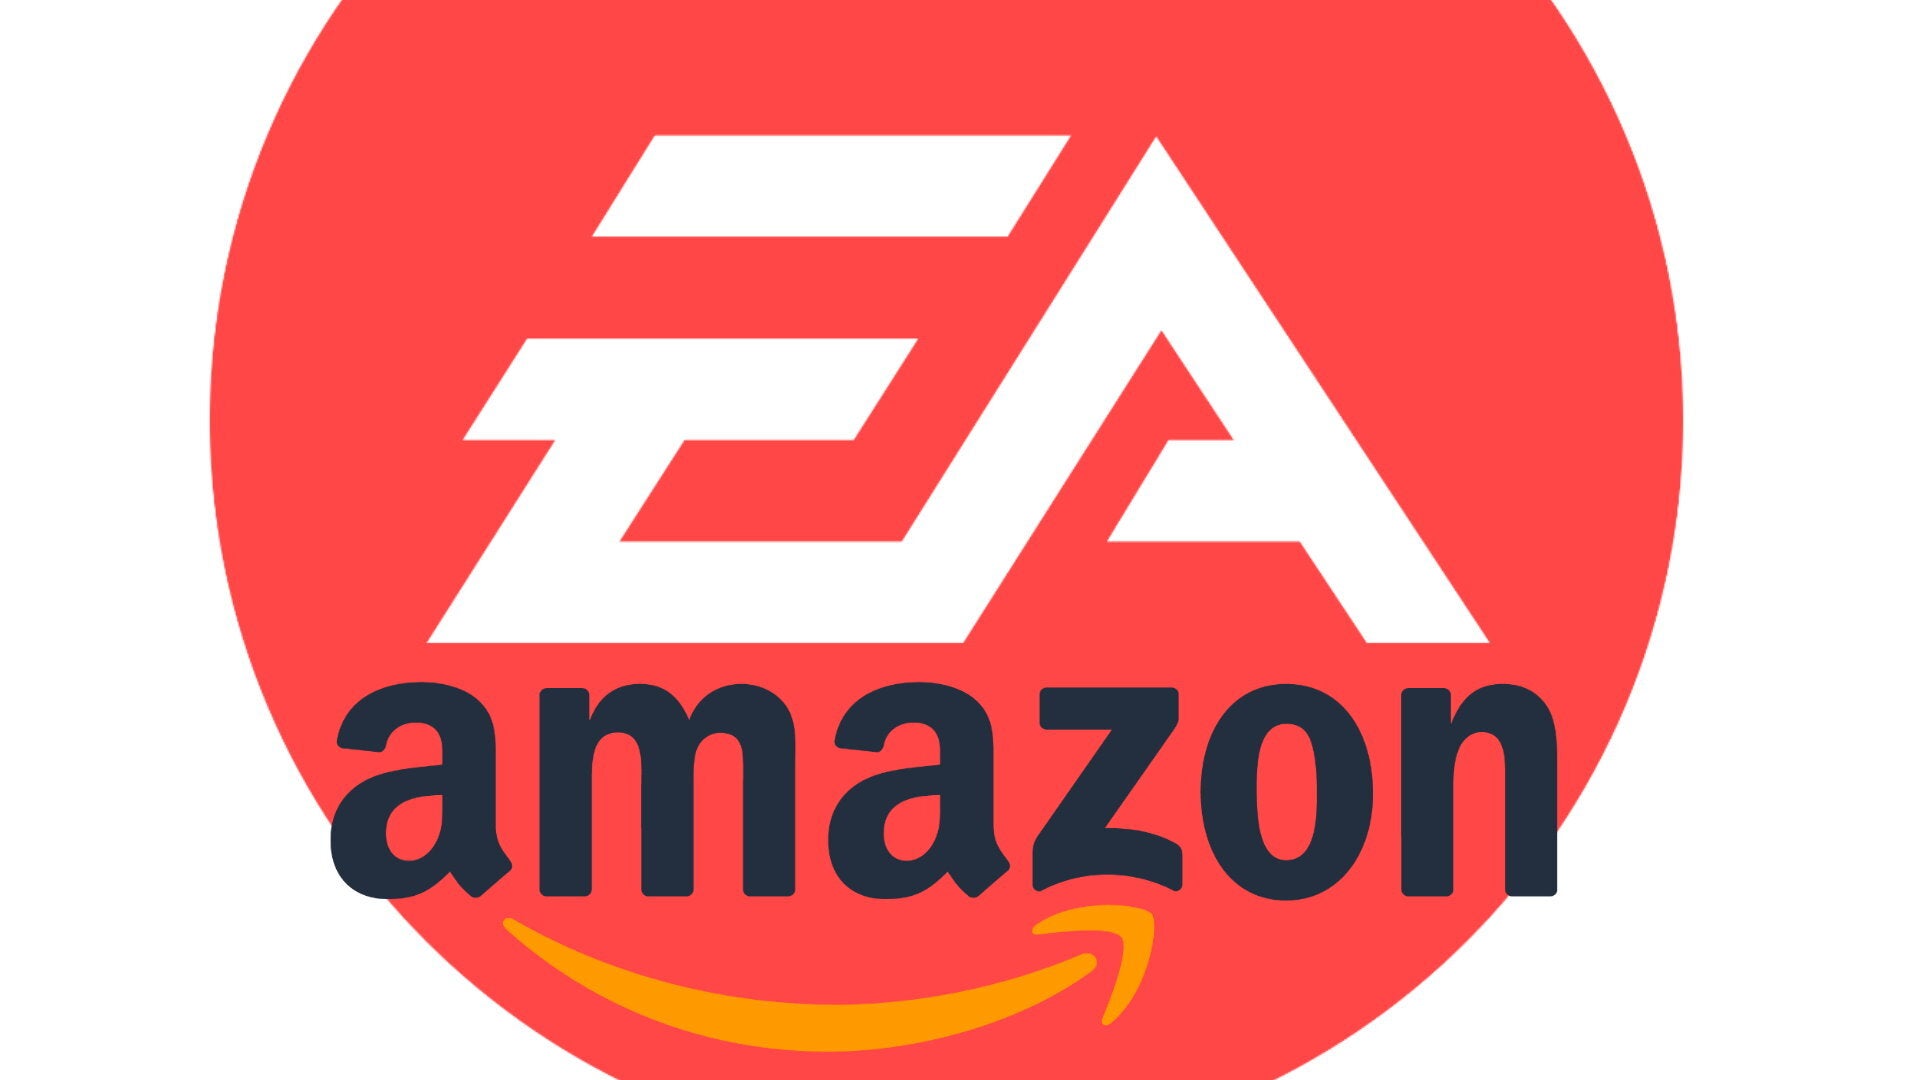 Amazon could be about to make an offer for AAA games publisher EA, according to sources familiar with the deal.